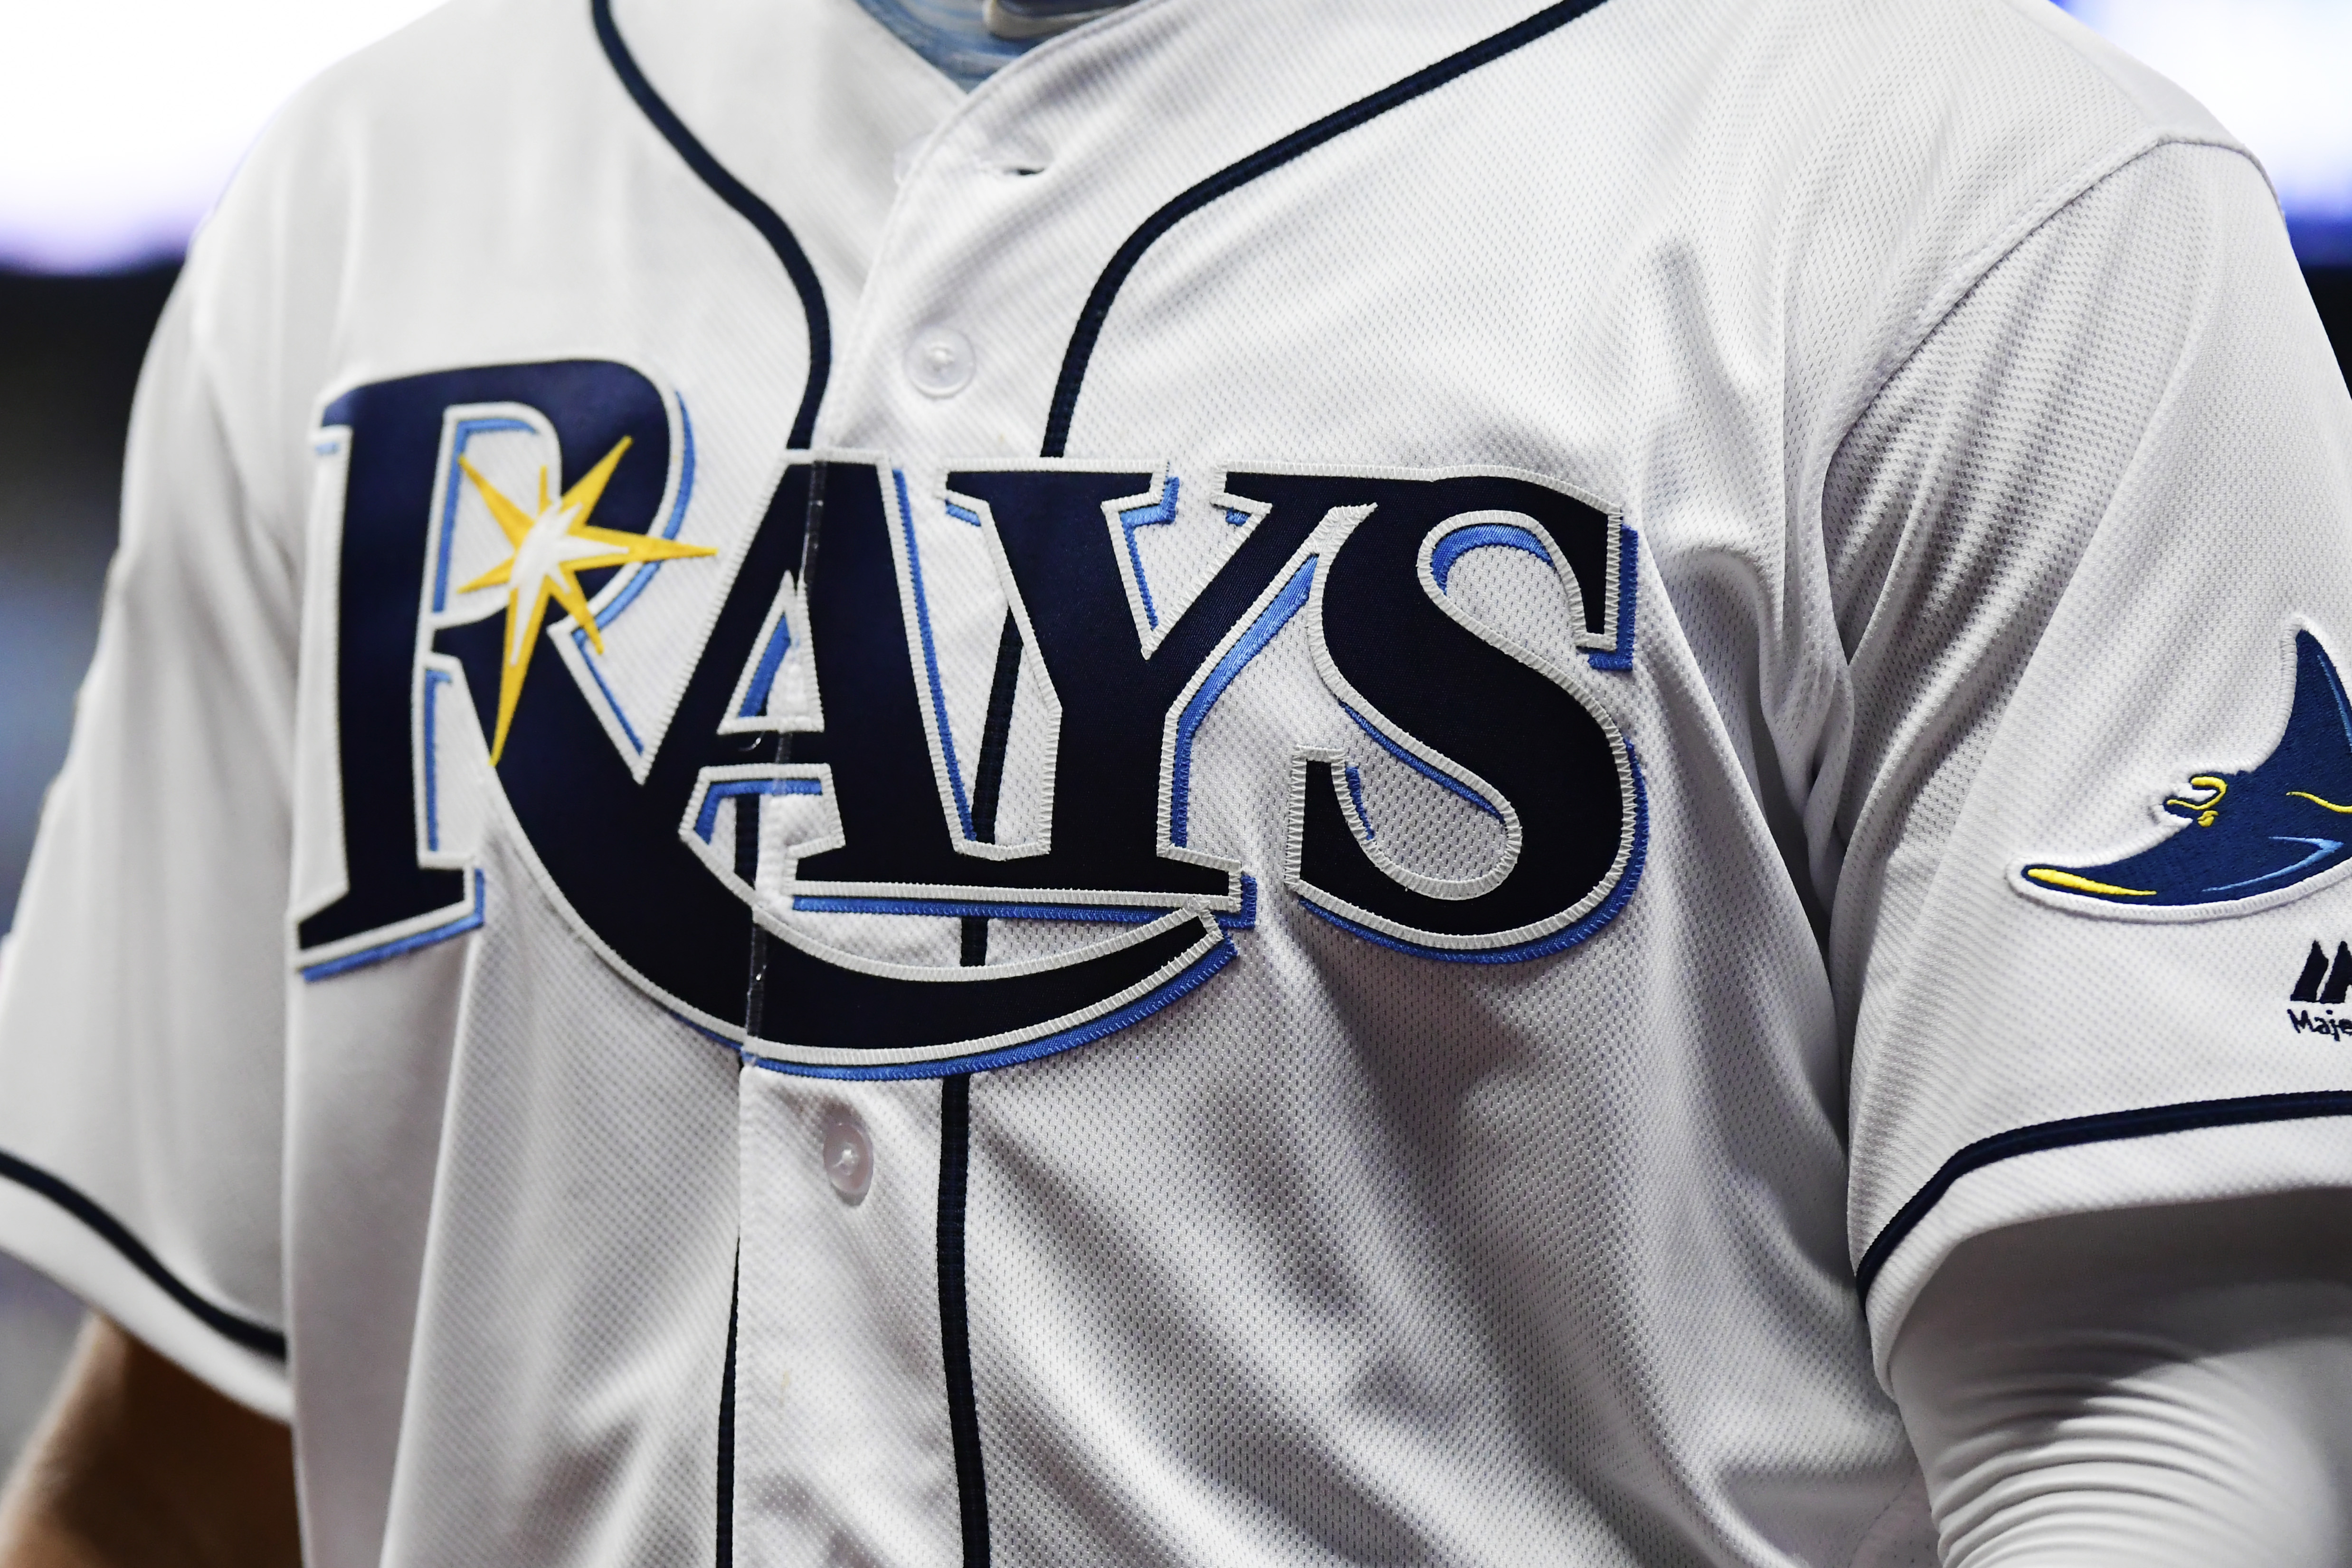 Death of Rays Bullpen Catcher Jean Ramirez Near Fort Worth Home Ruled
a Suicide